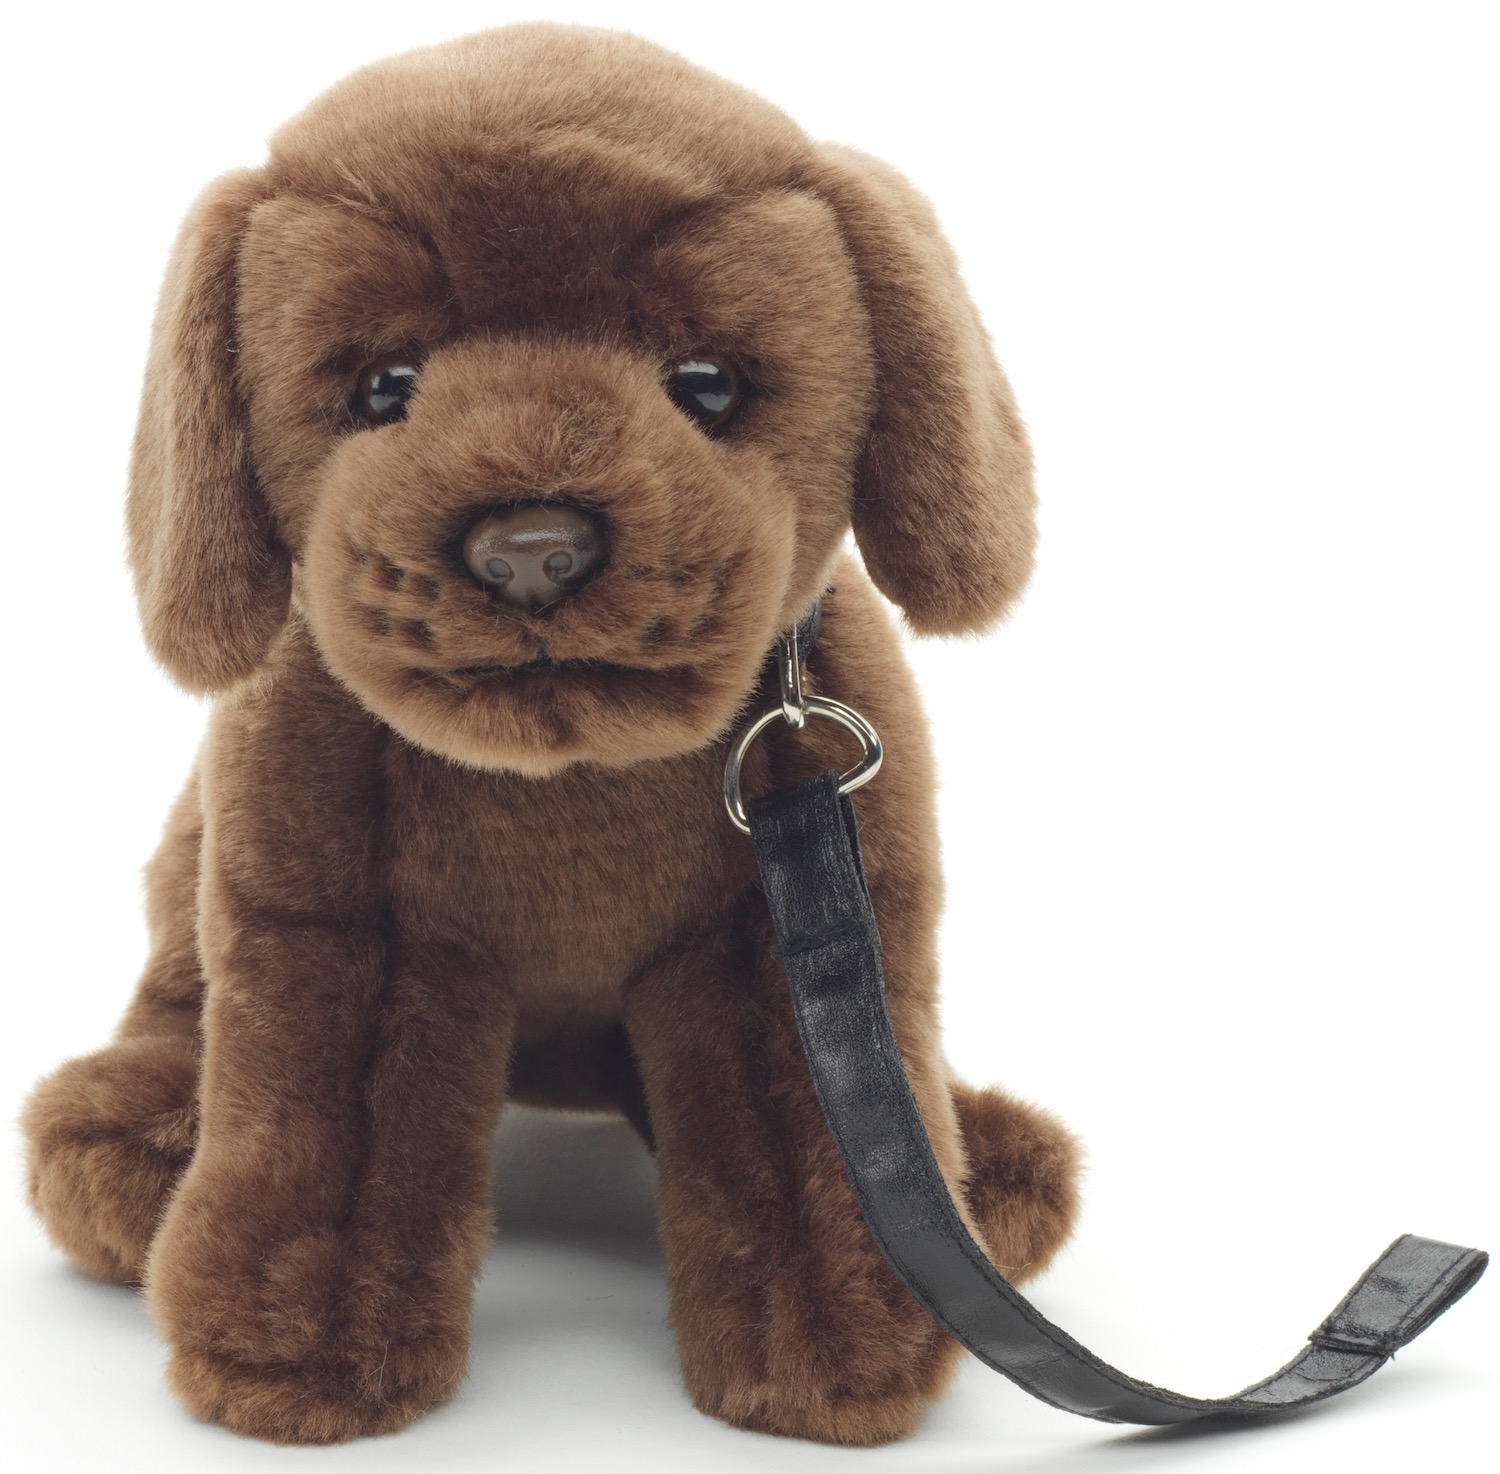 Labrador puppy (brown), with leash - 23 cm (height)